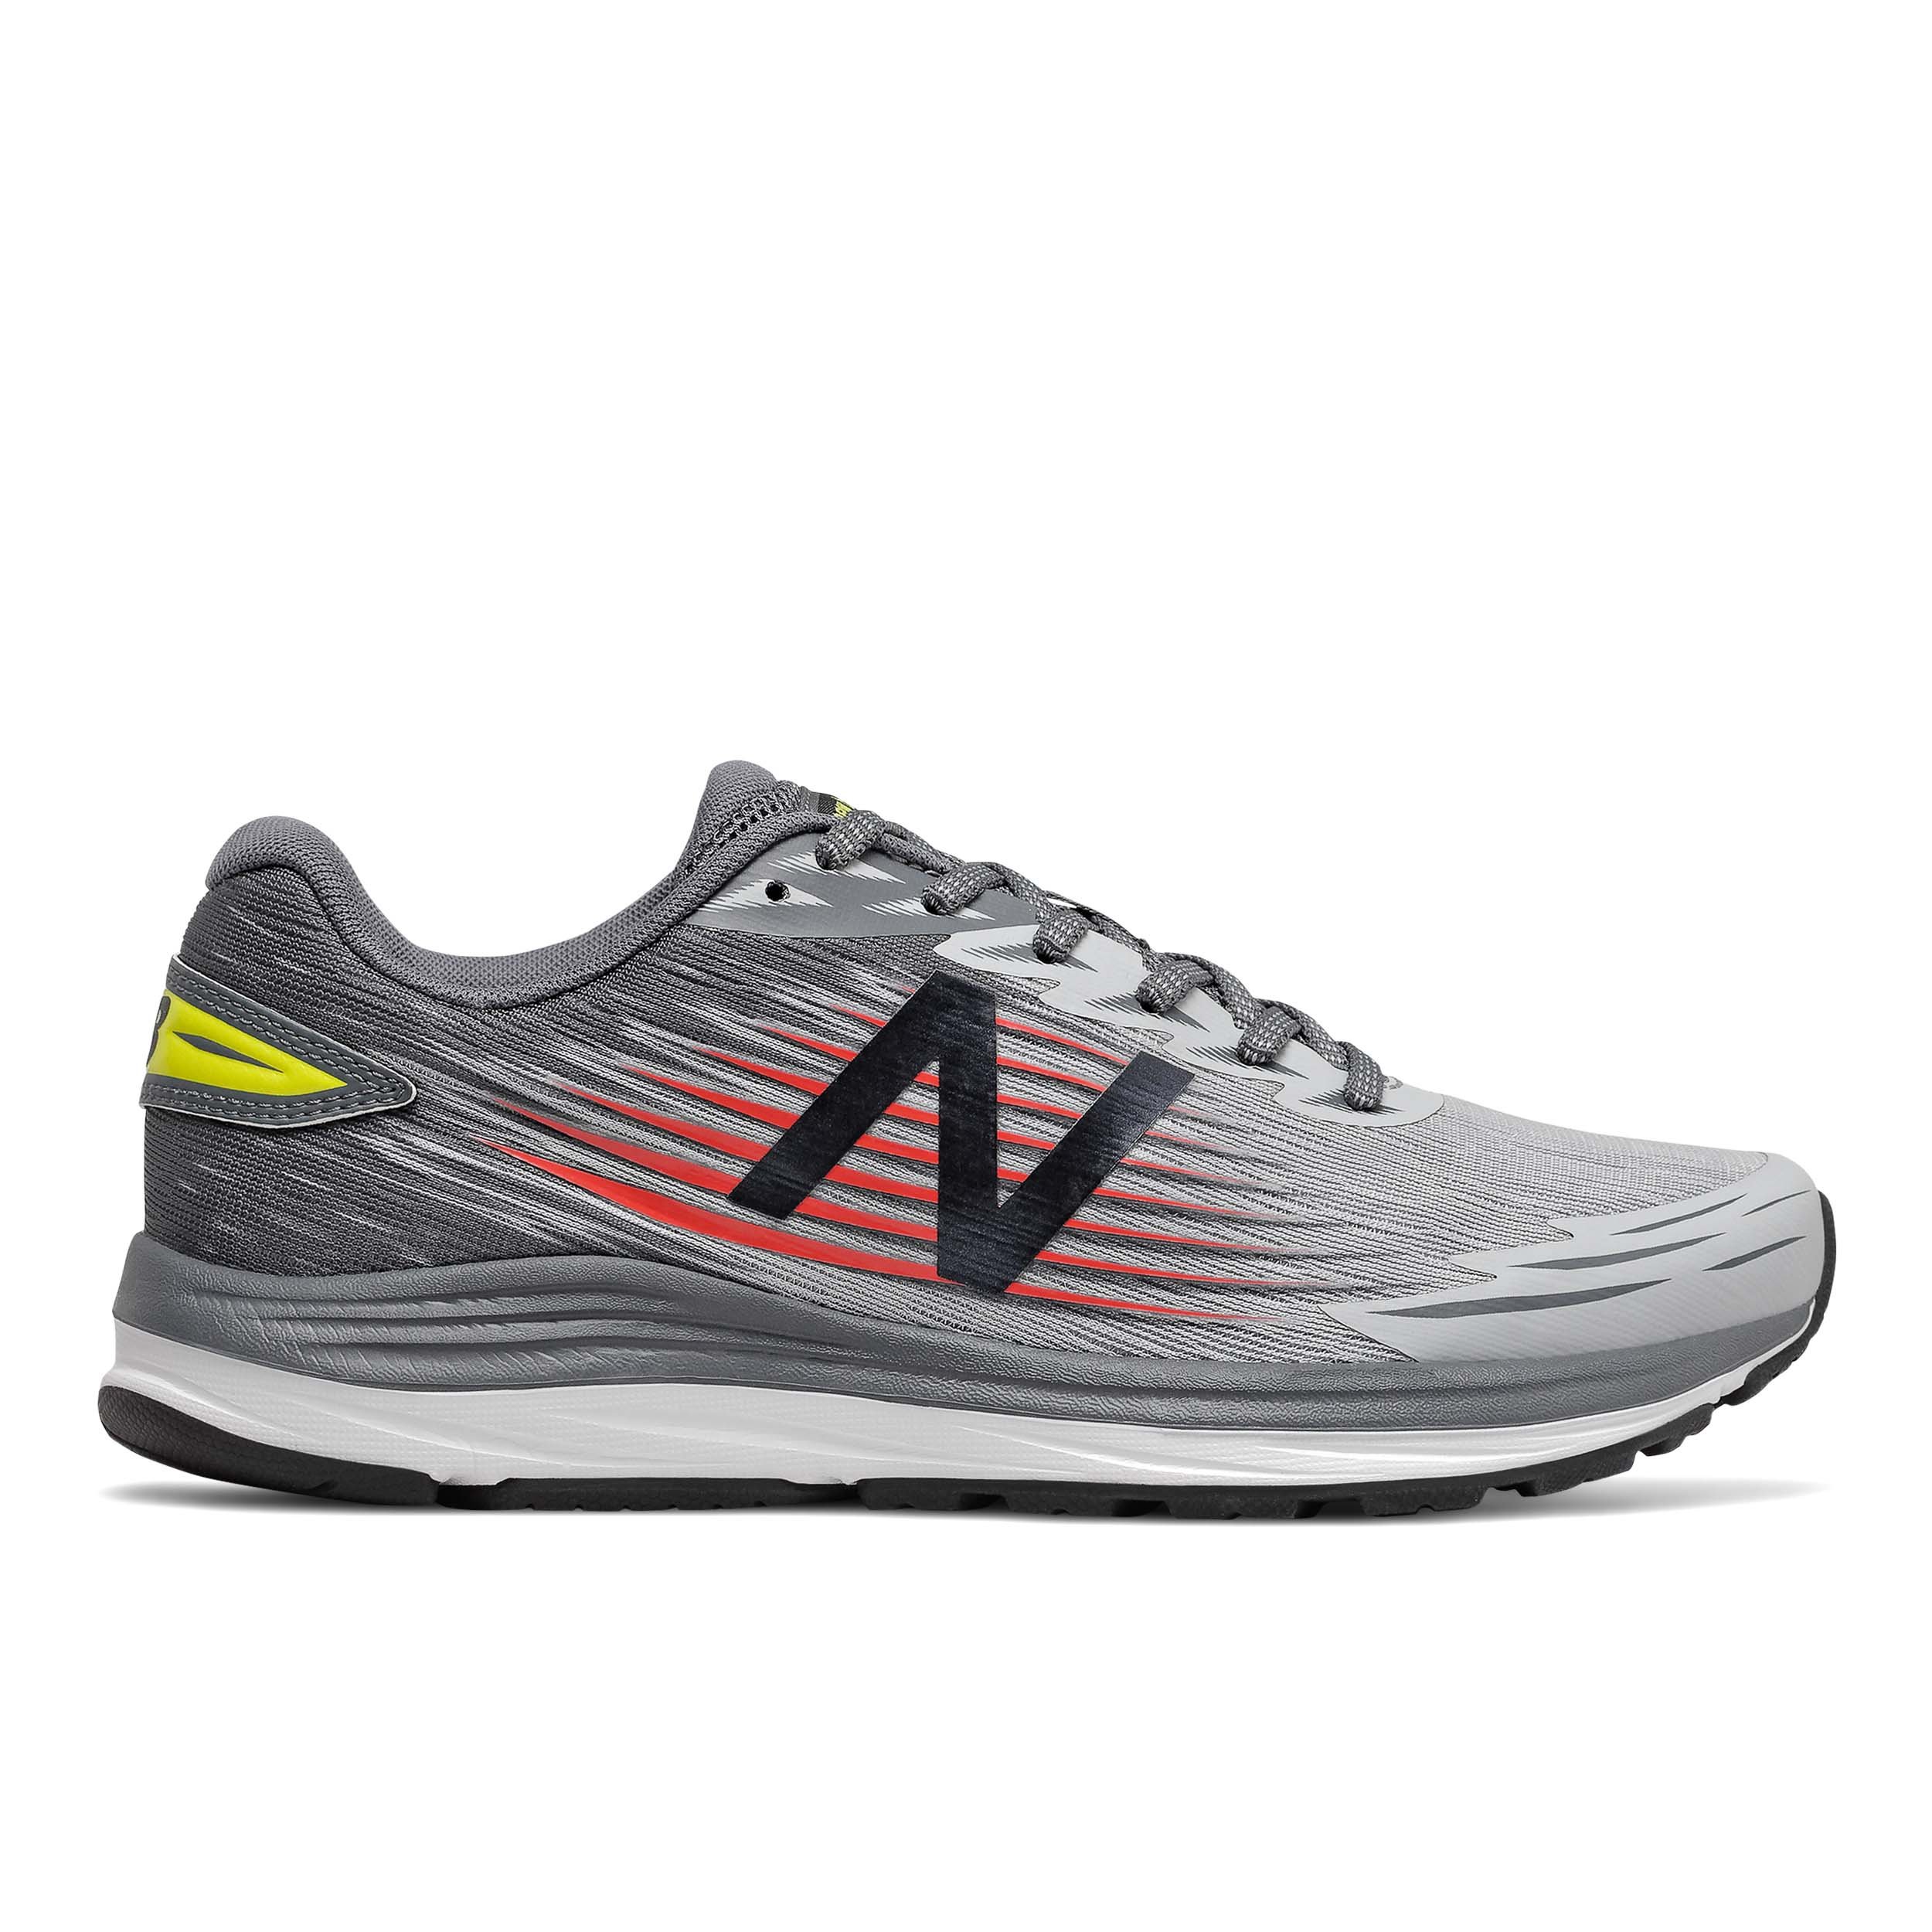 New Balance Synact Shoes Grey Color 